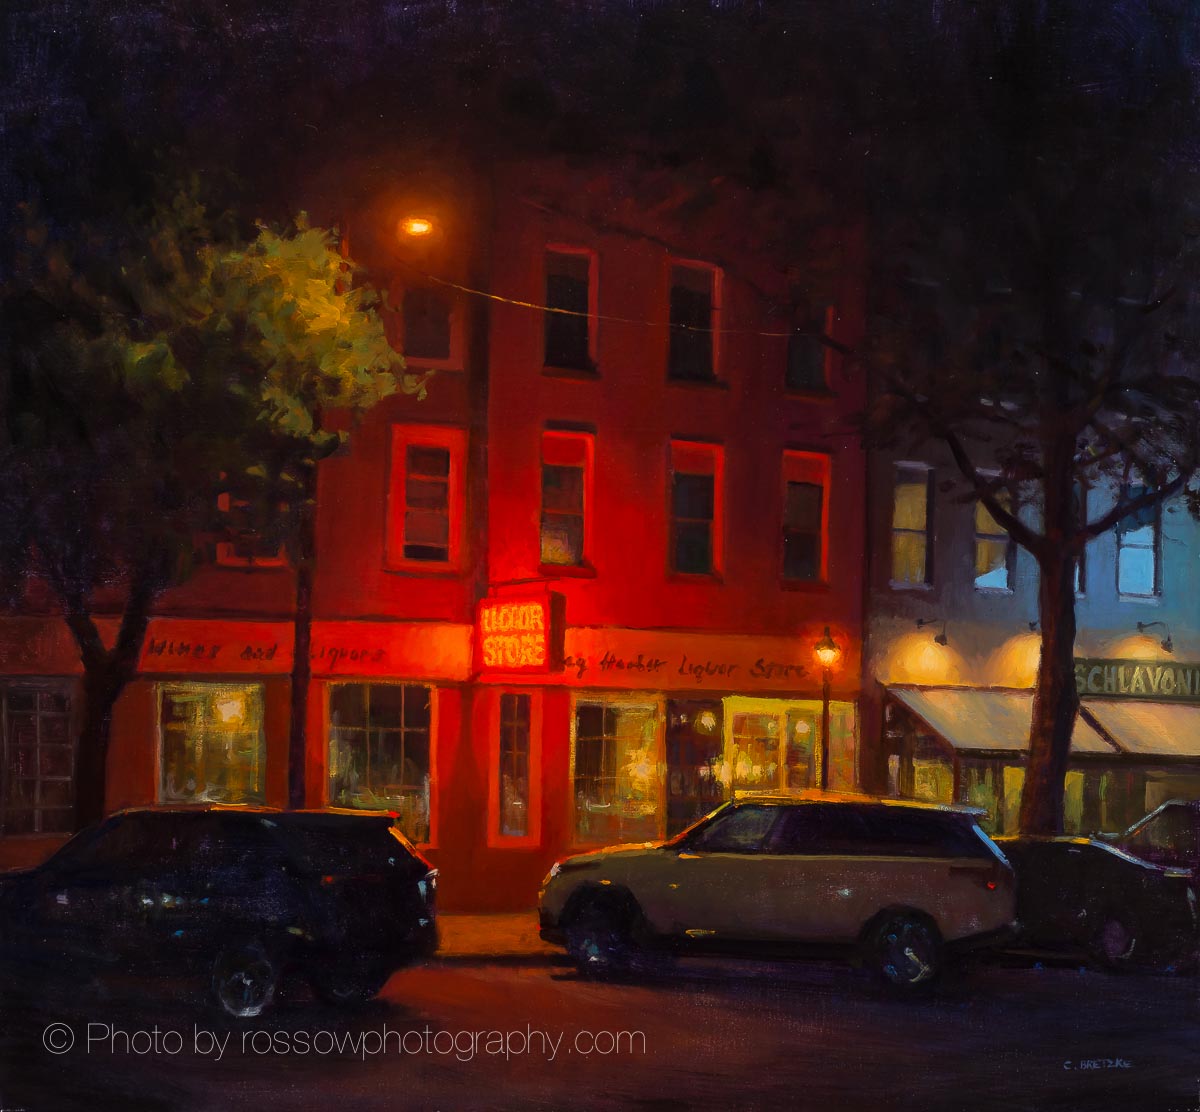 Main Street Liquors - painting by Carl Bretzke photographed by Mitch Rossow